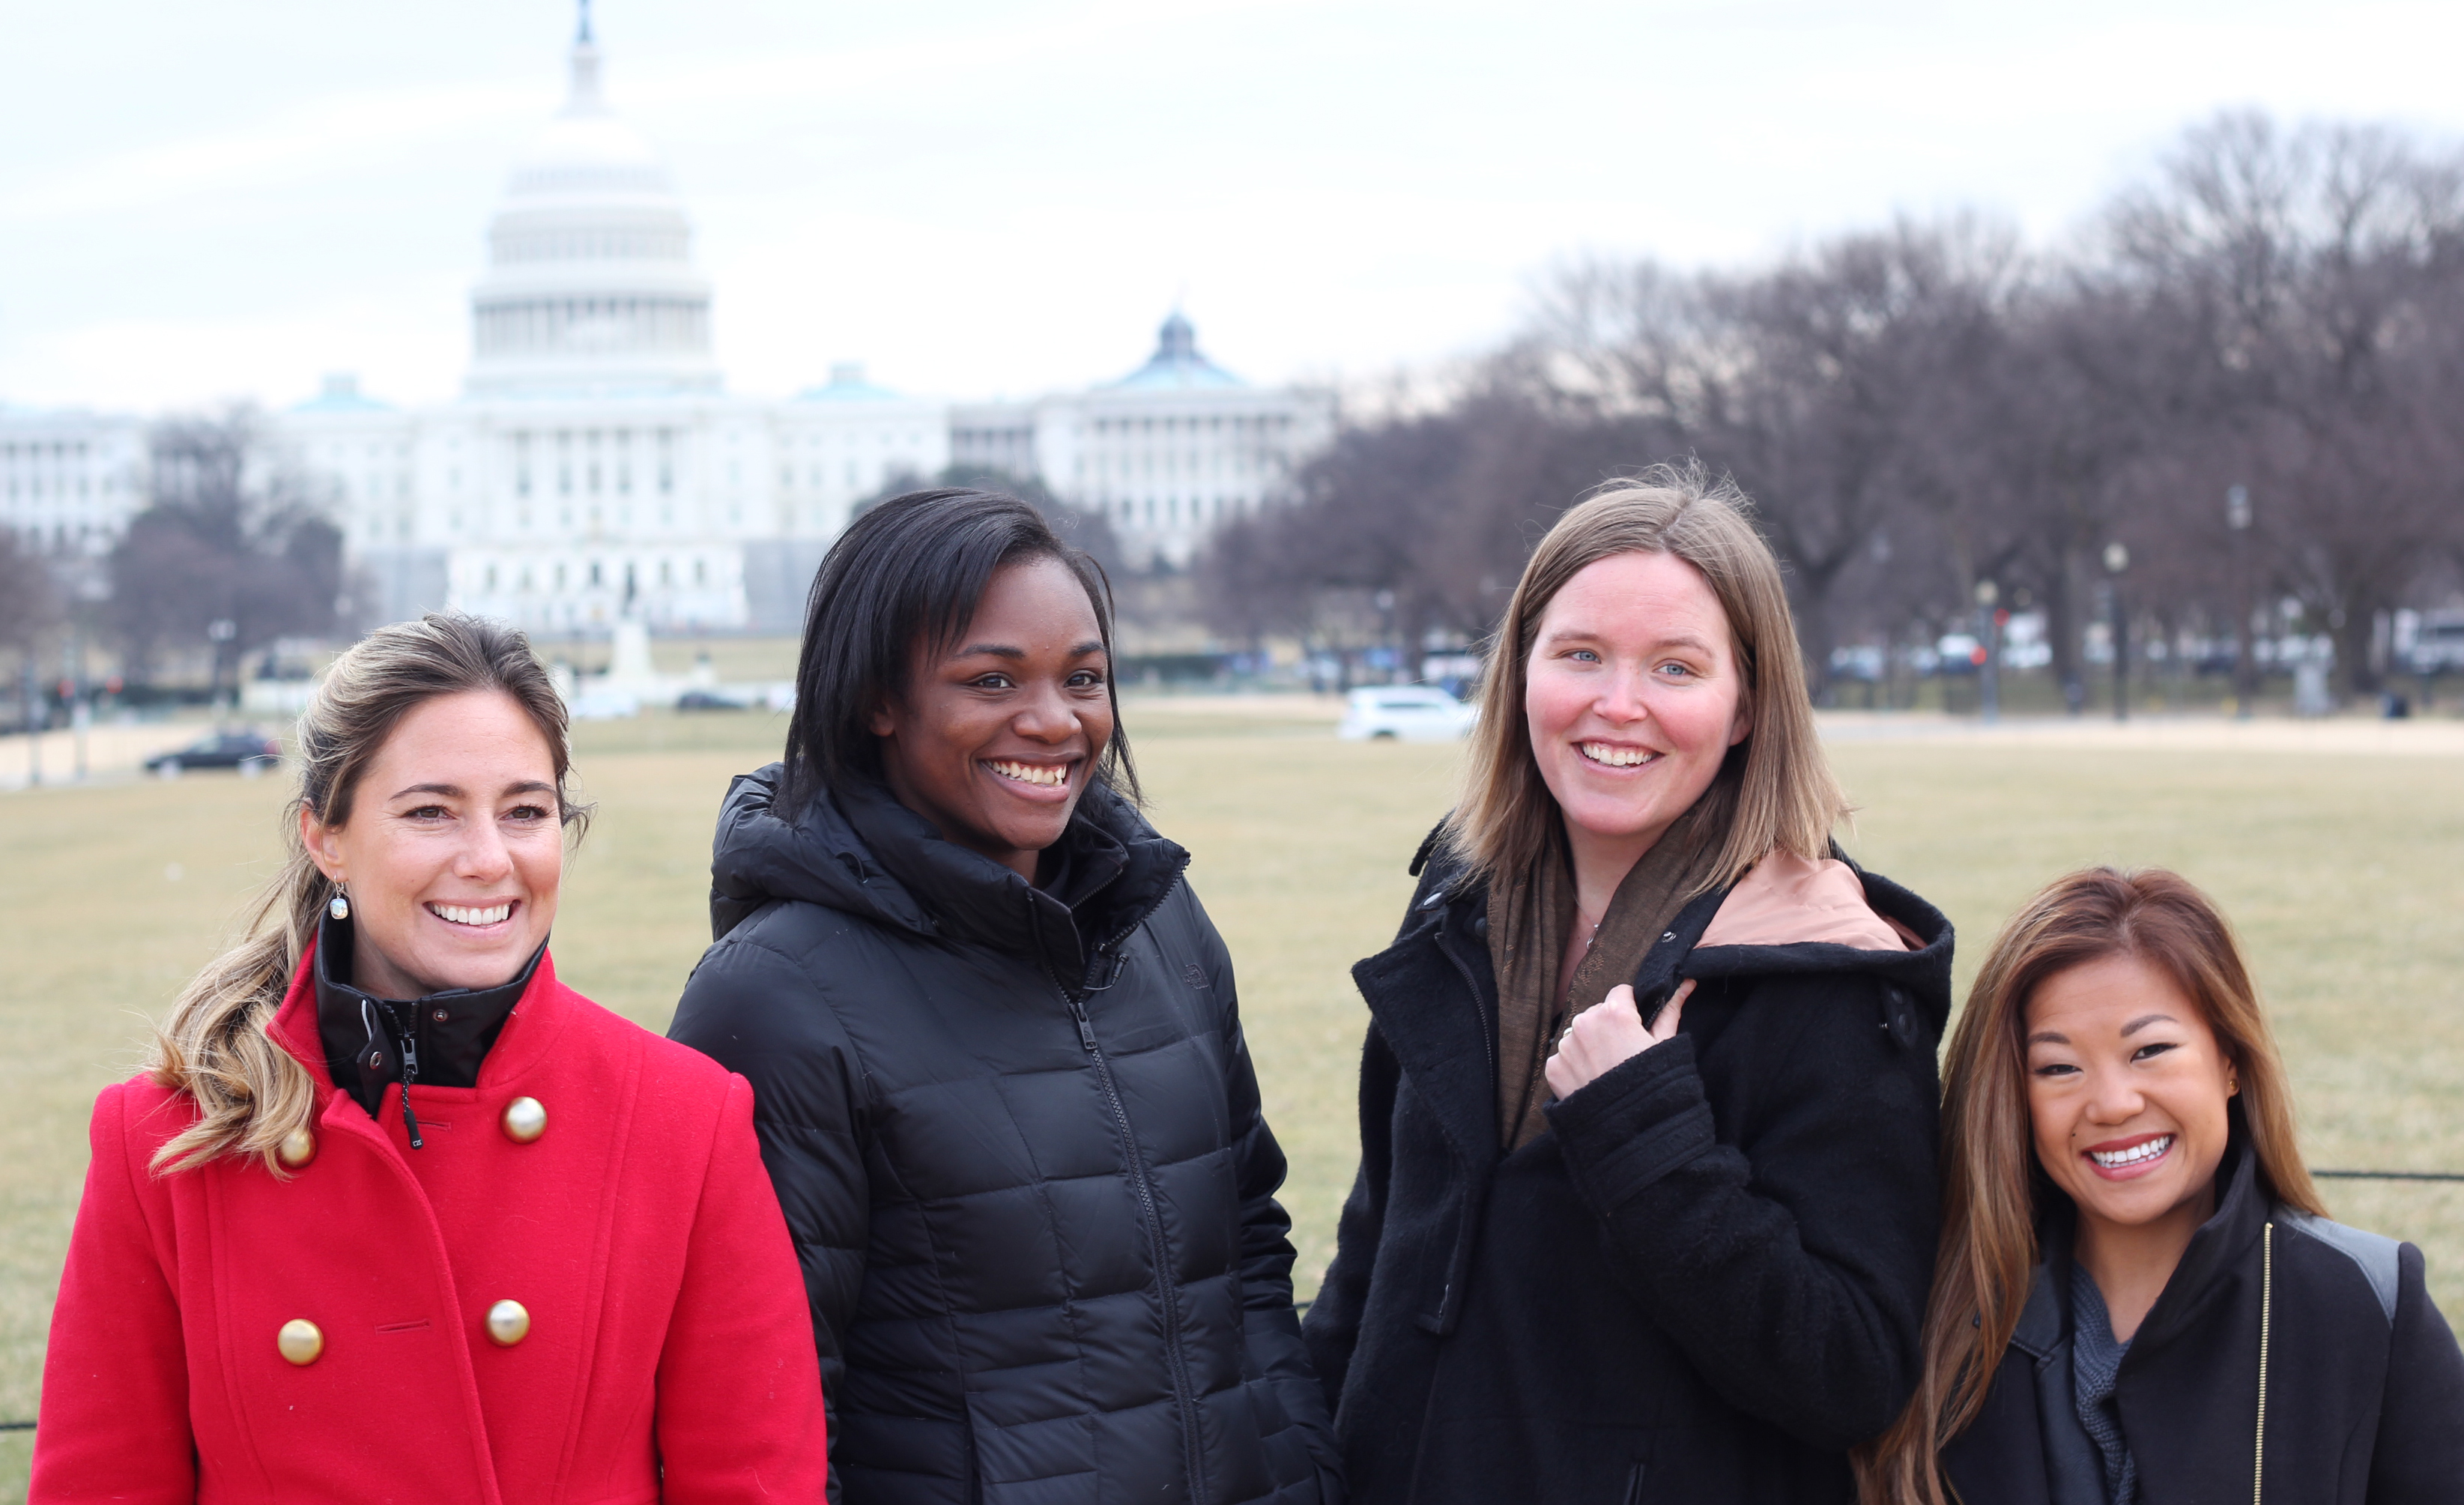 Athletes and Women’s Rights Activists Gather on Capitol Hill to Advocate for Girls and Women in Sports